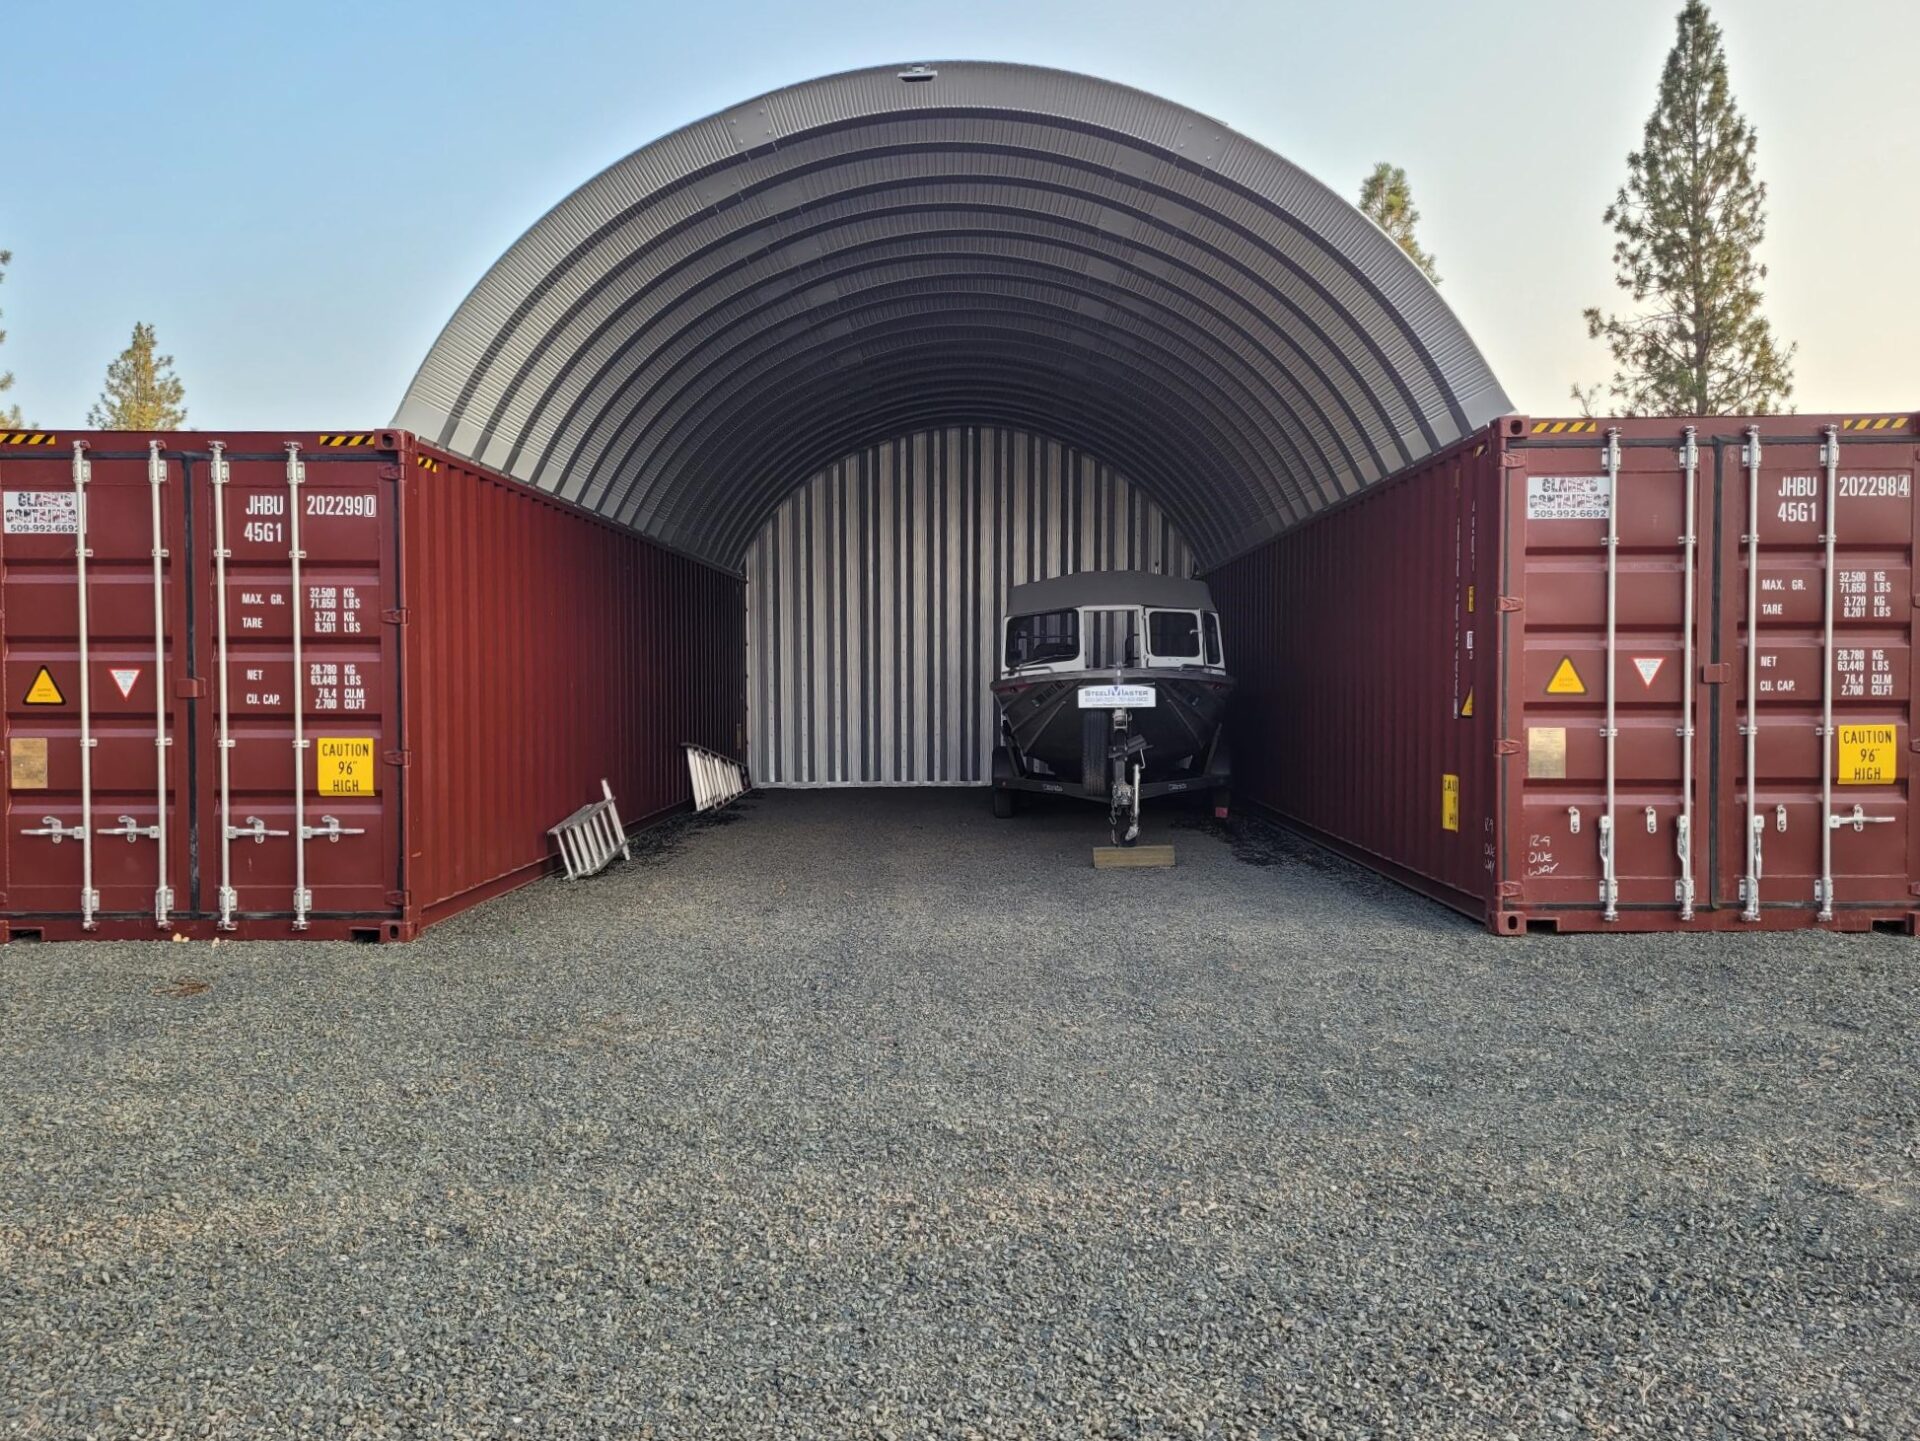 steel arch roof mounted on two red shipping containers with solid rear steel endwall and a boat inside of the structure